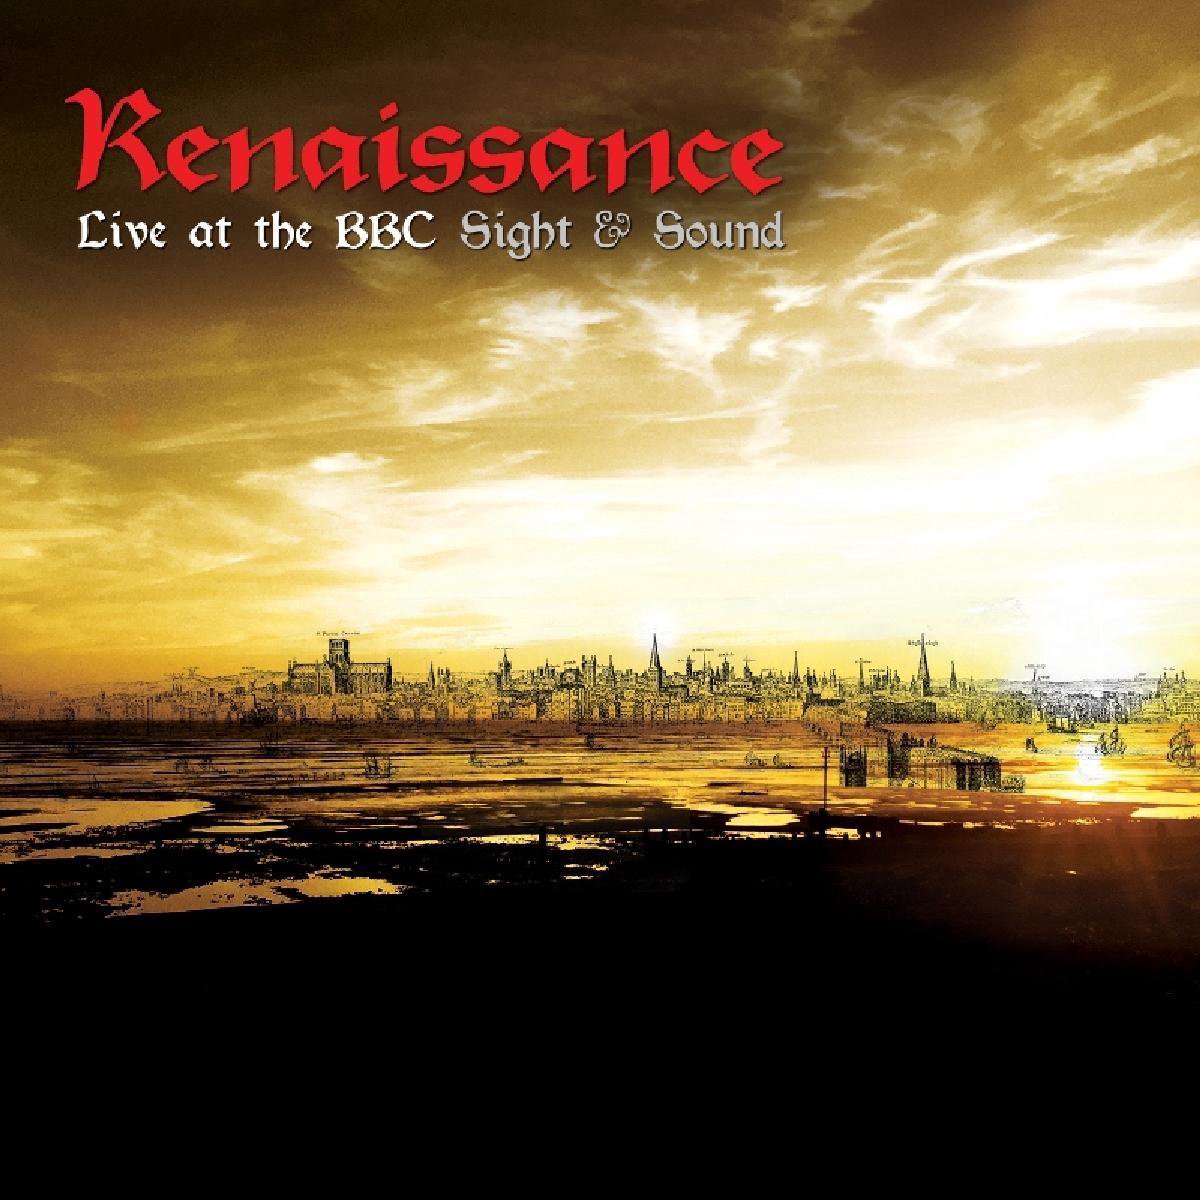 Renaissance Live At The Bbc - Sight And Sound